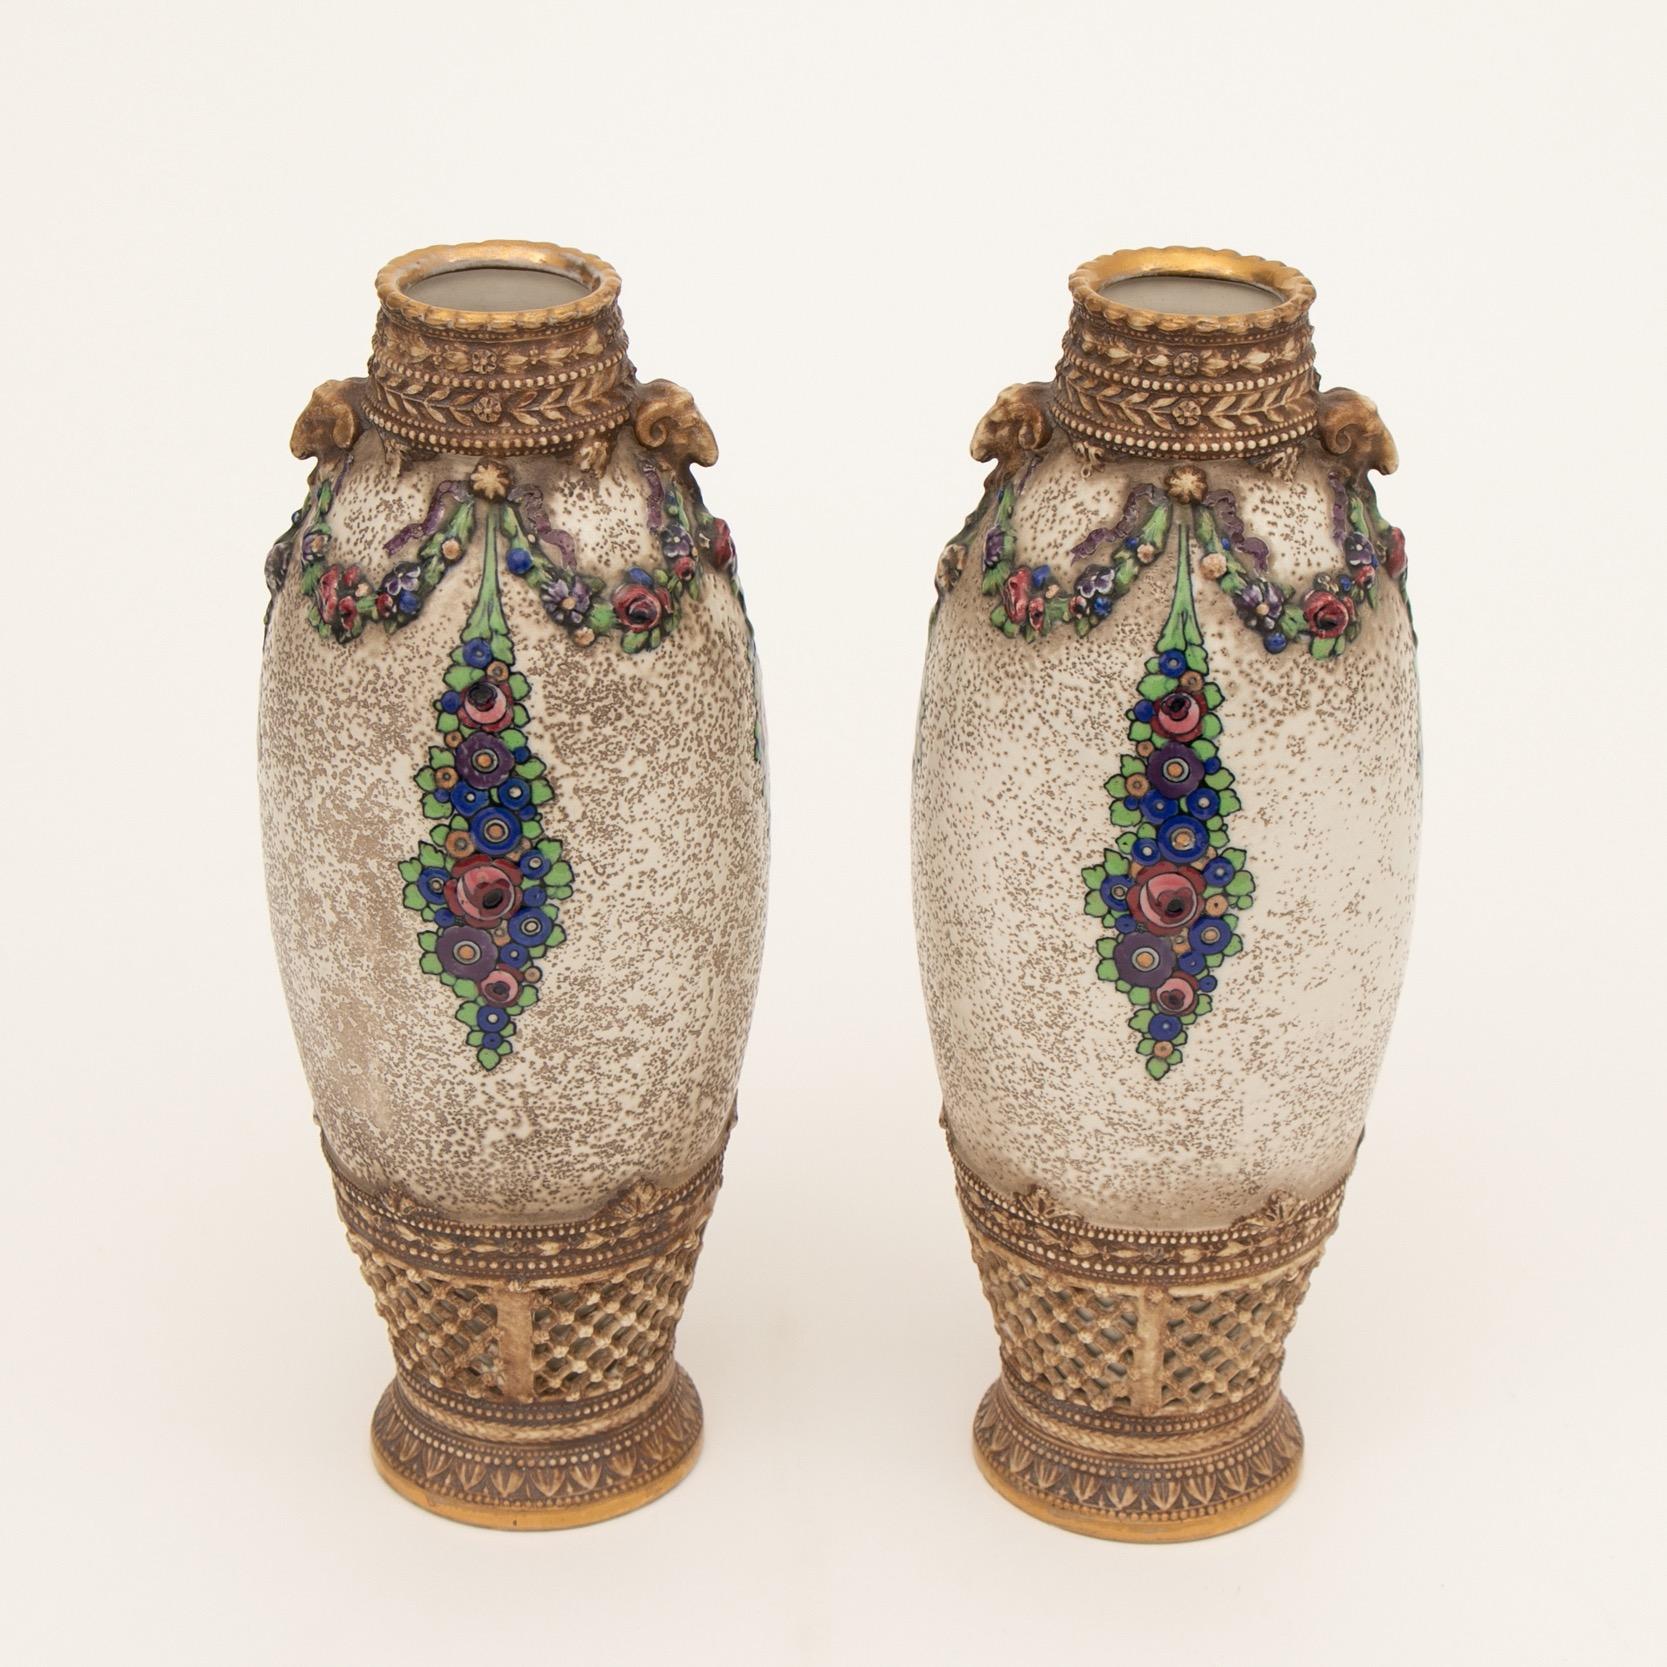 A superb pair of secessionist design vases produced by The Alexandra Porcelain Works. Turn Austria. Royal Vienna.
Designed by Paul Dachsel for Ernst Wahliss.
Beautifully decorated with two rams heads between floral embossed flower swags and